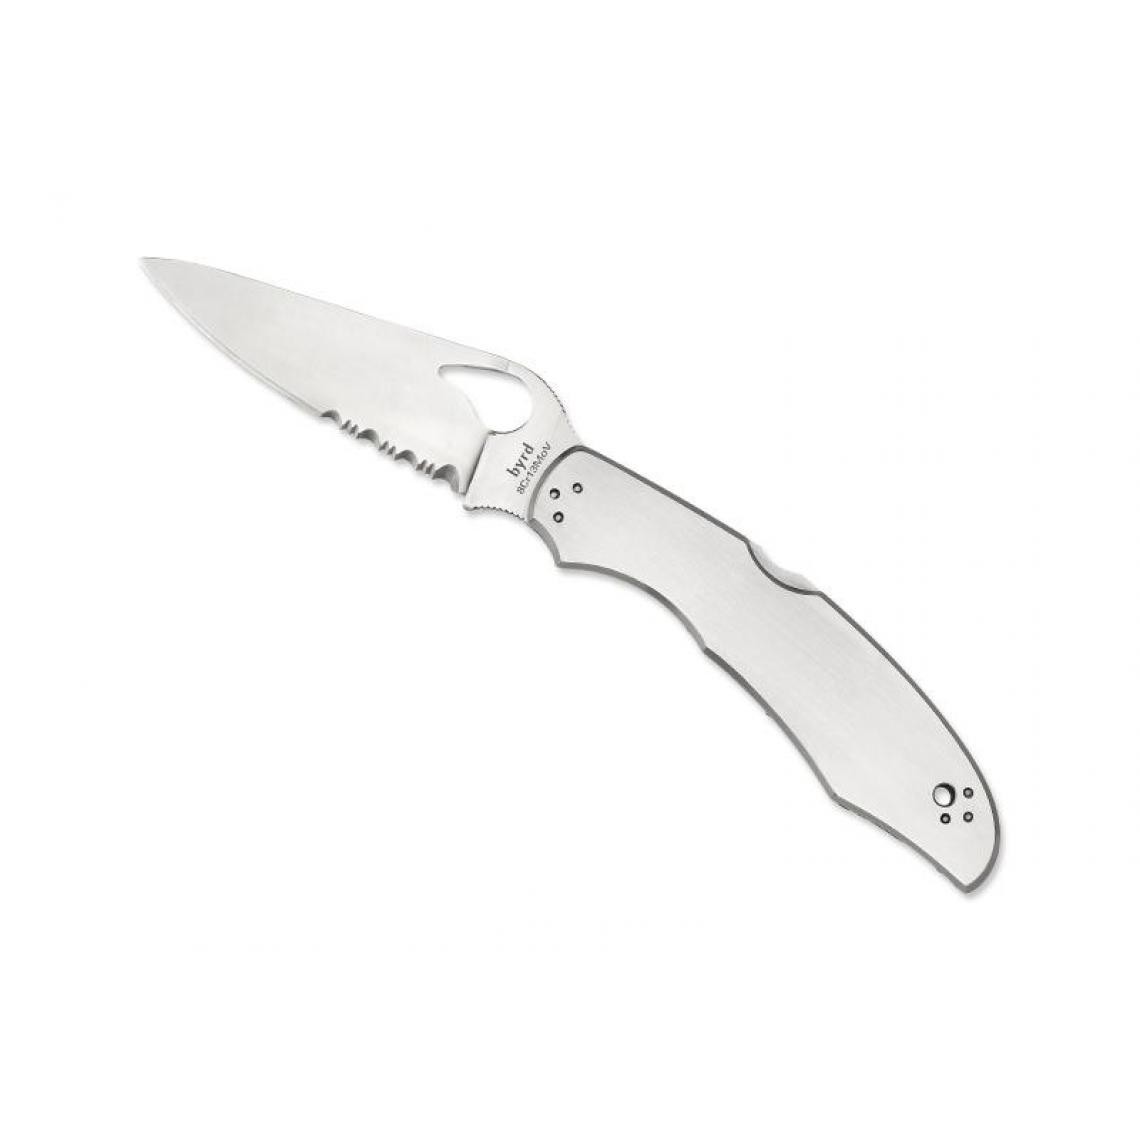 Divers Marques - BYRD KNIFE - BY03PS2 - COUTEAU BYRD CARA CARA 2 TOUT INOX - Outils de coupe